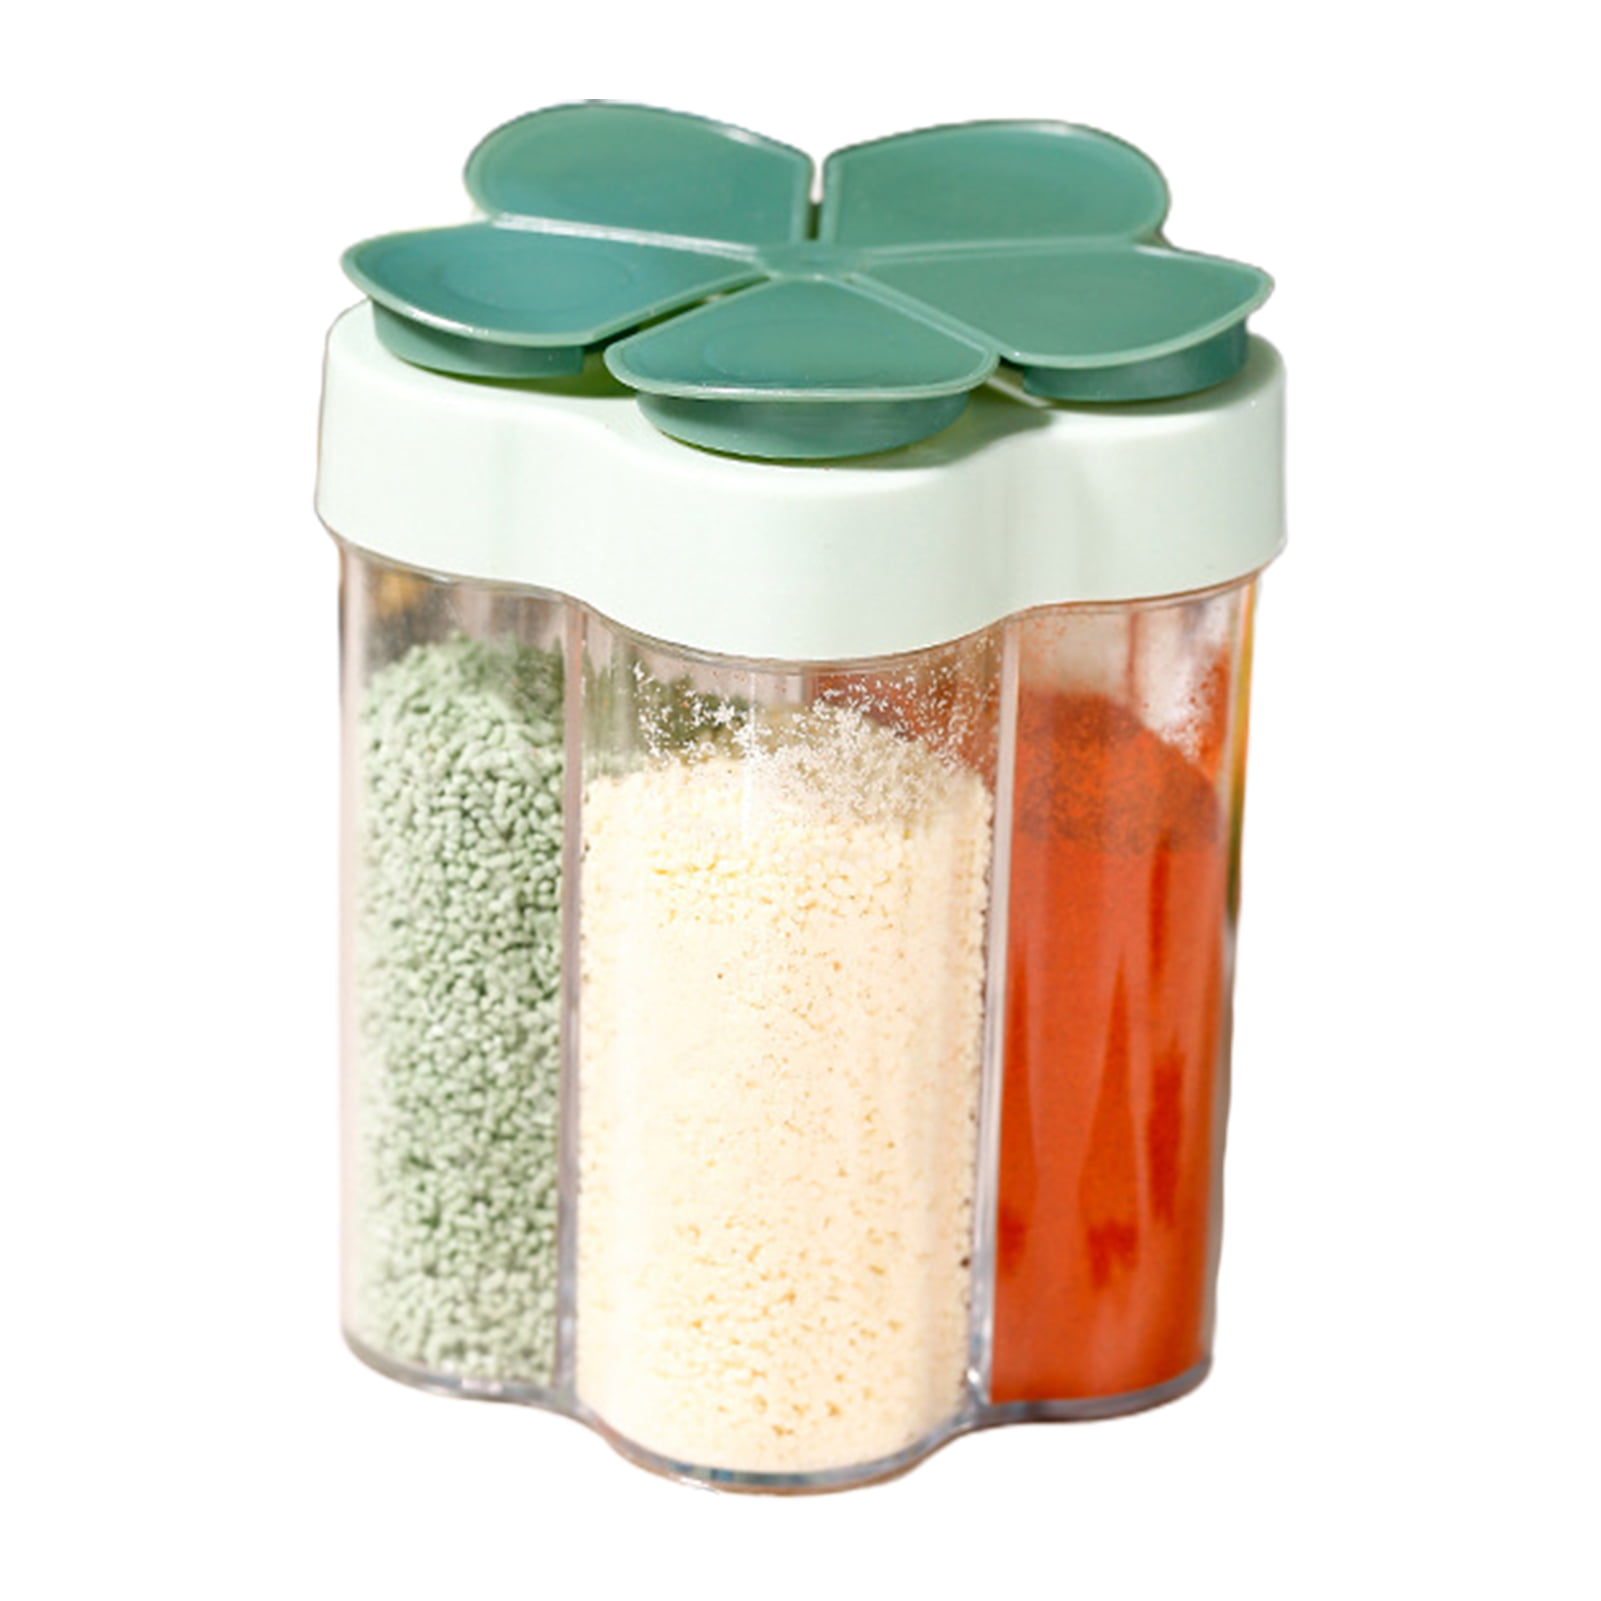 Dream Lifestyle Plastic Spice Jars/Bottles, Water-Proof Spice Containers  with 5 compartments for enclosed ,Creative Seasoning Box with Shaker Lids  for